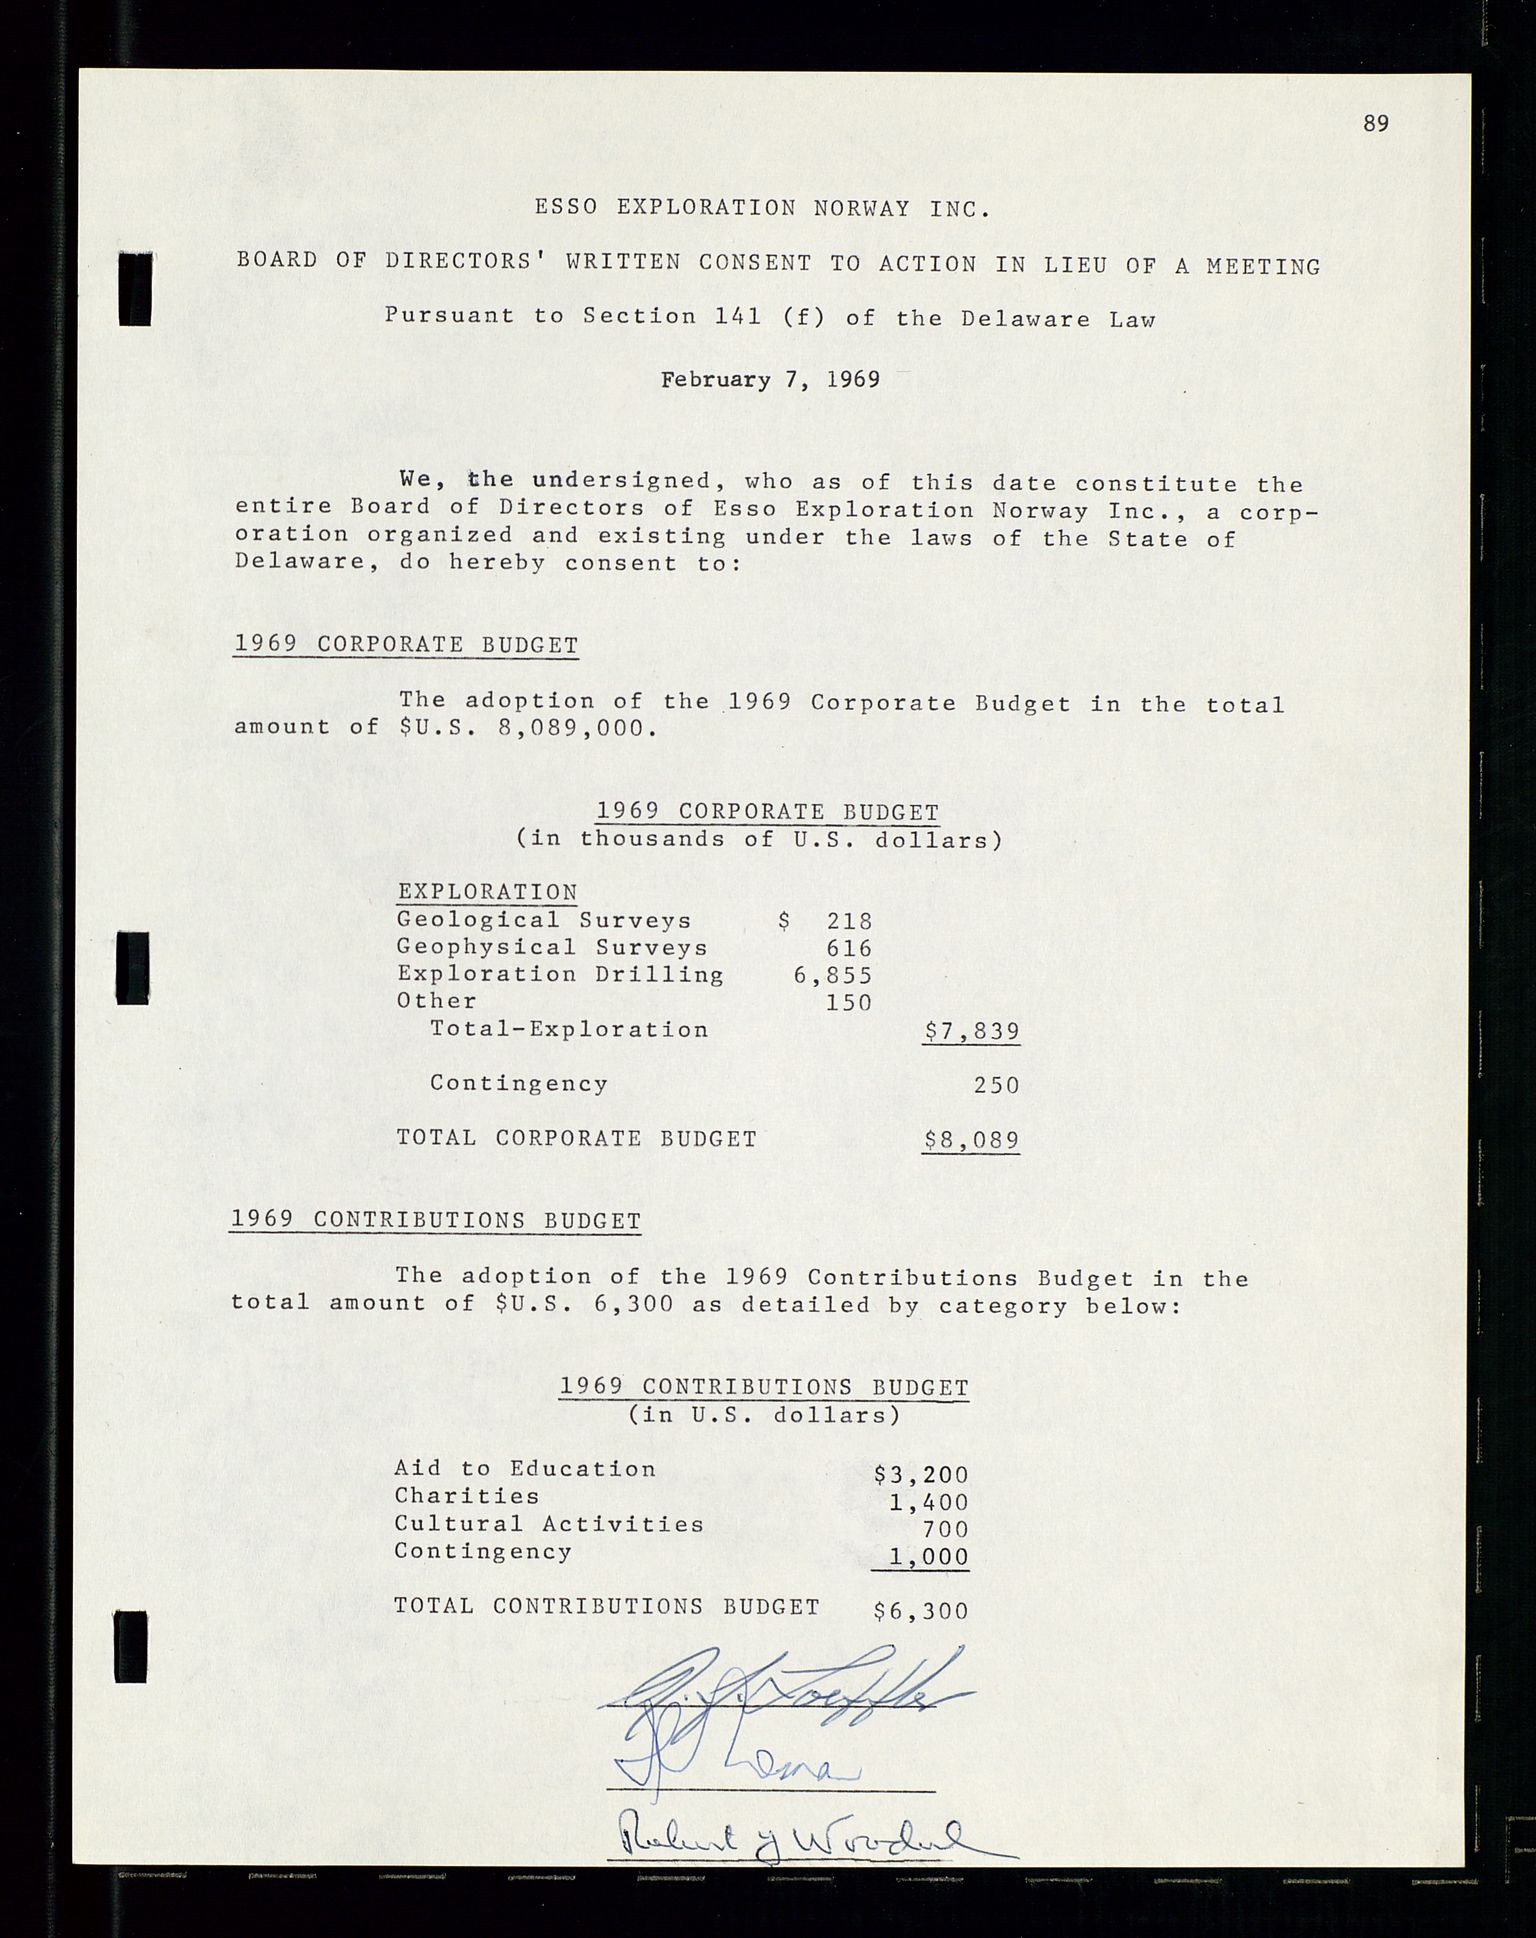 Pa 1512 - Esso Exploration and Production Norway Inc., SAST/A-101917/A/Aa/L0001/0001: Styredokumenter / Corporate records, By-Laws, Board meeting minutes, Incorporations, 1965-1975, s. 89